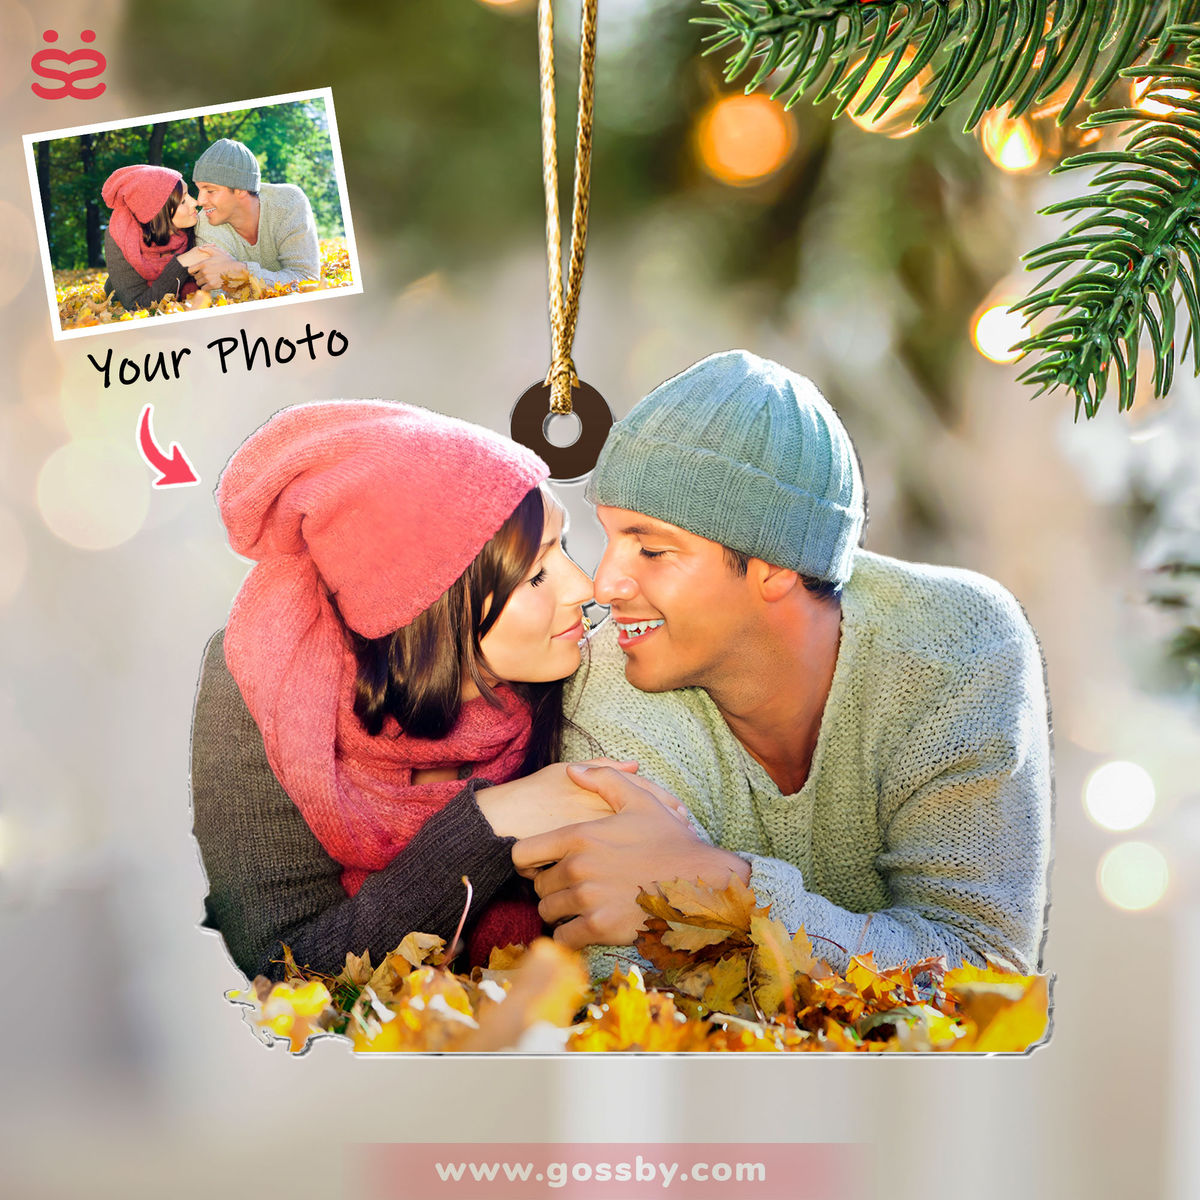 Customized Your Photo Ornaments - Wedding Gift - Gift for Couple - Couple Photo Gifts, Christmas Gifts for Couple